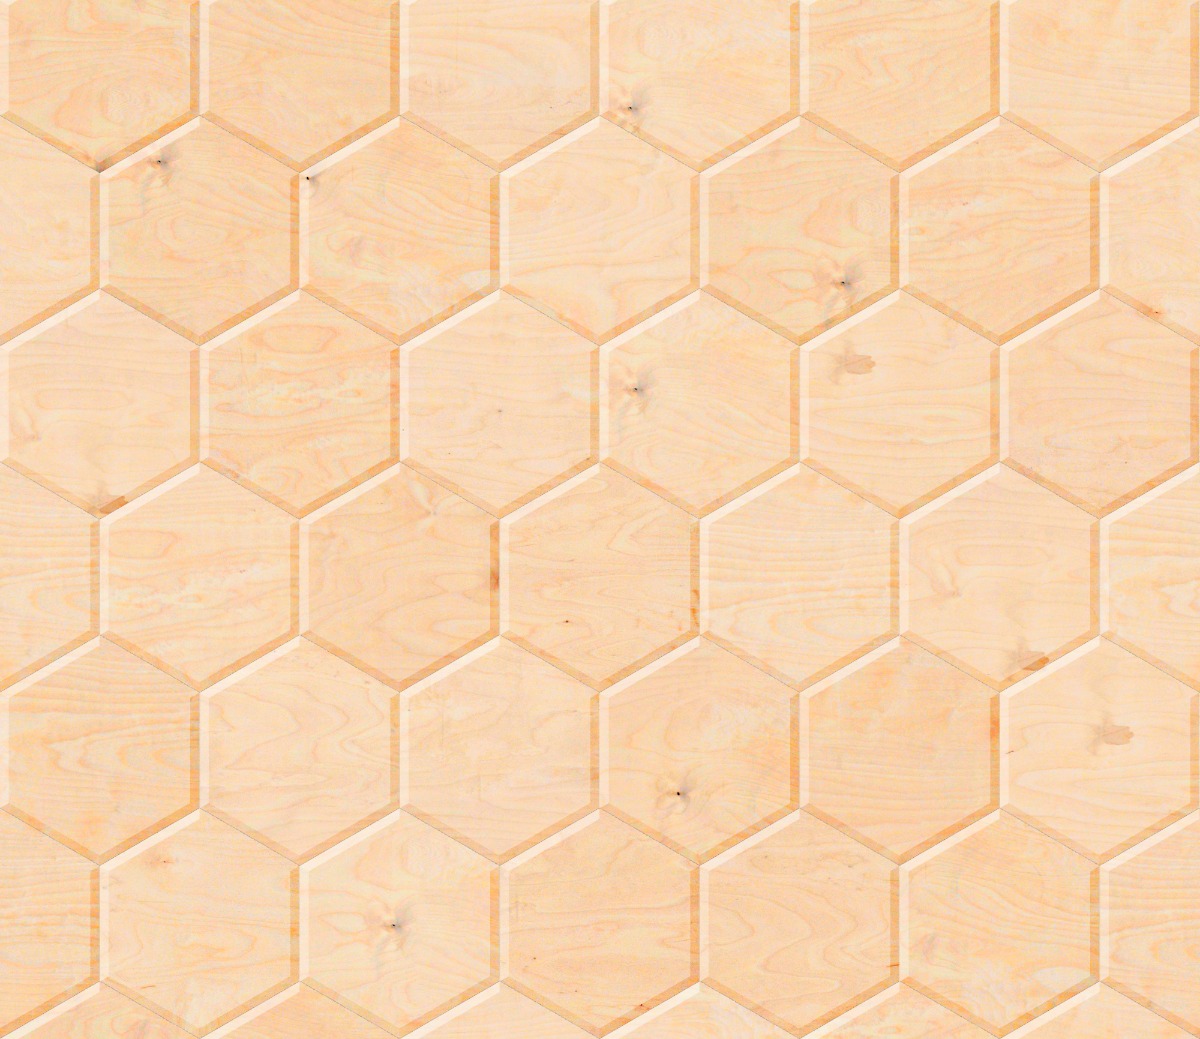 A seamless wood texture with birch plywood boards arranged in a Hexagonal pattern